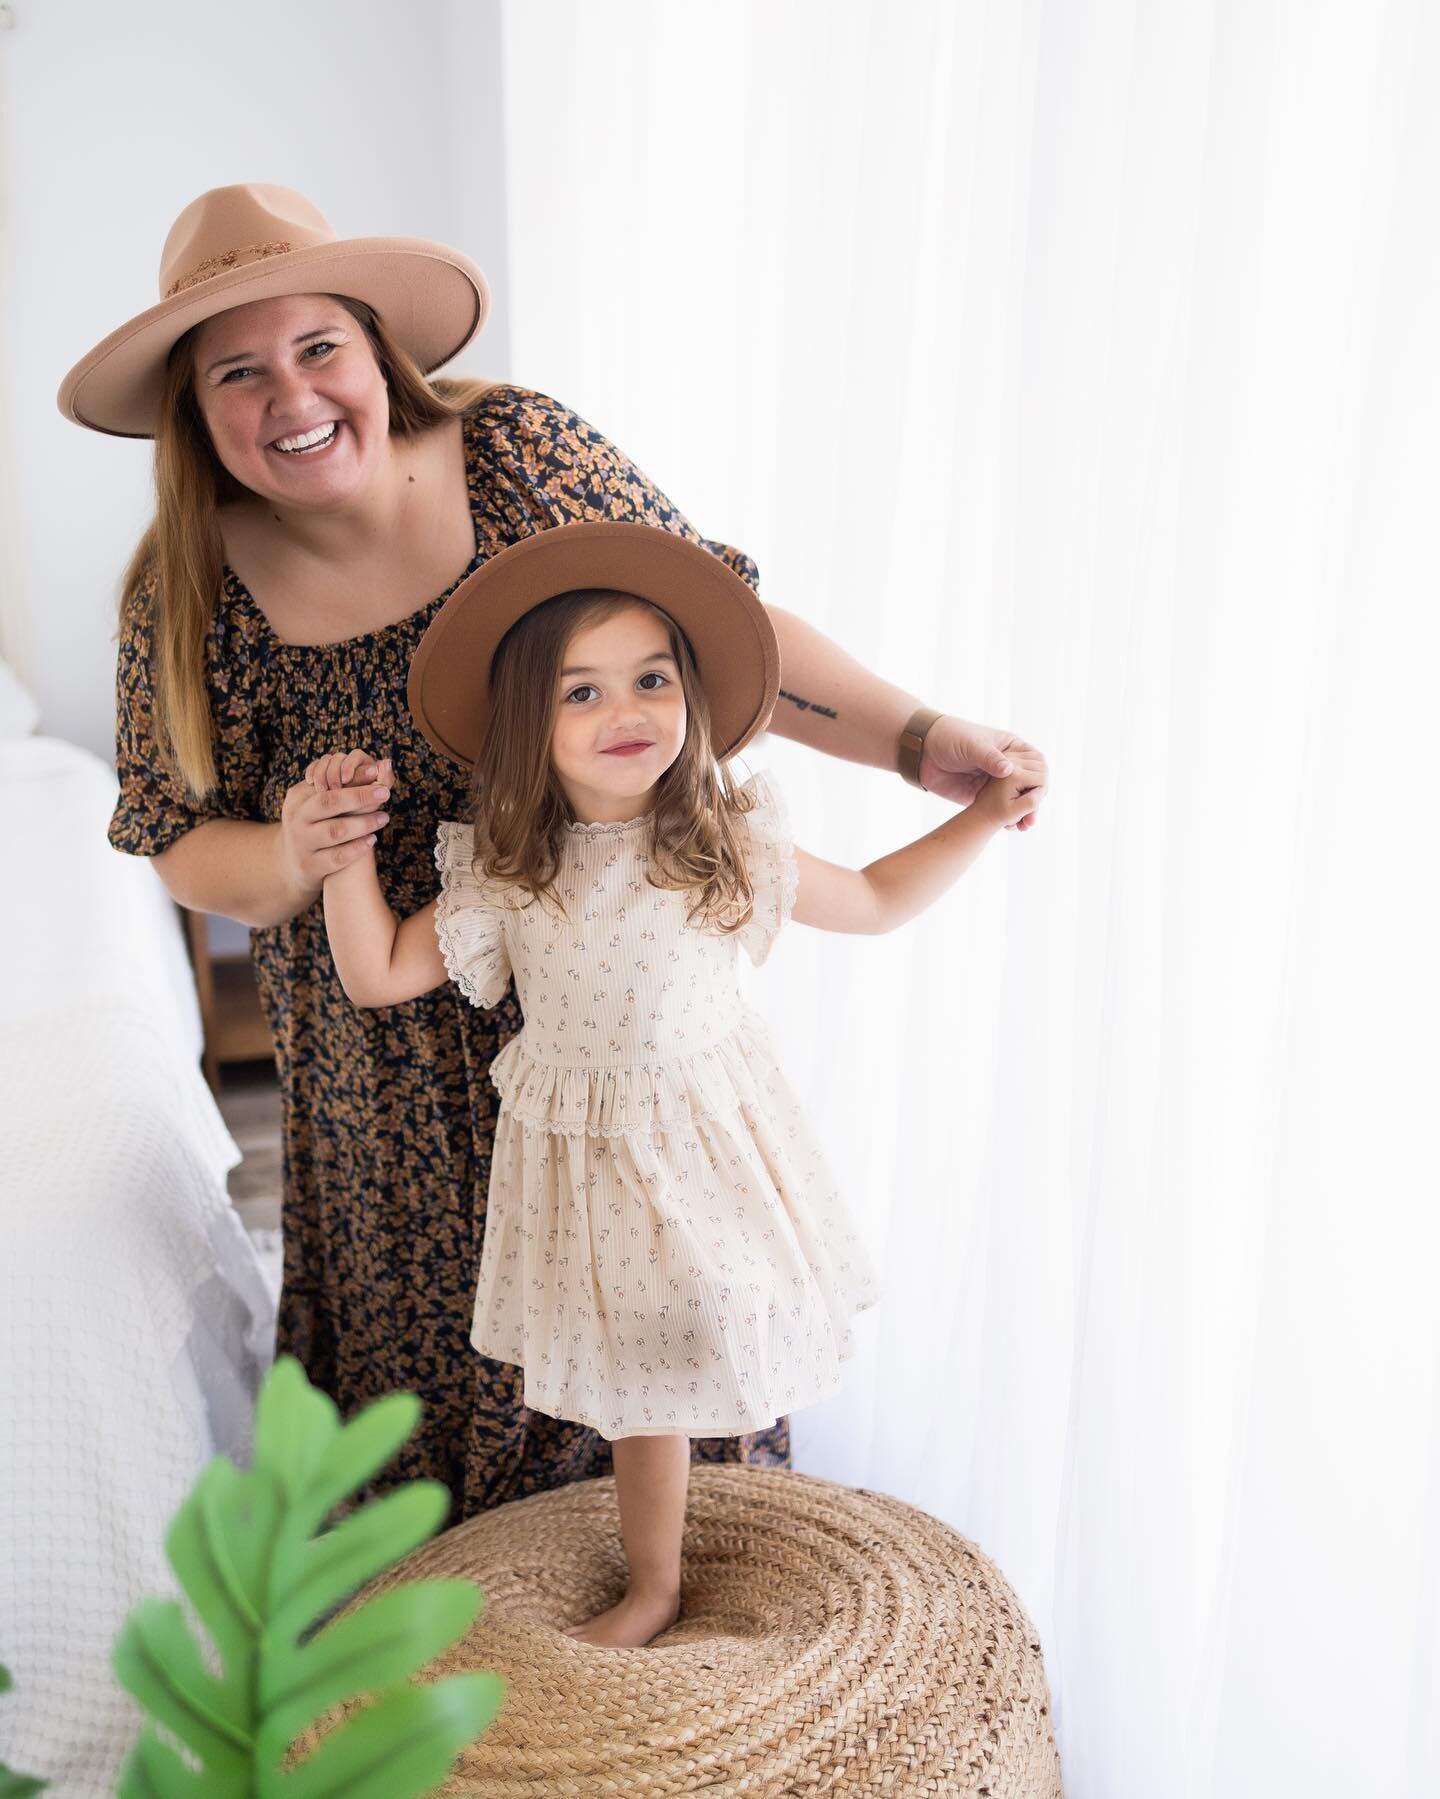 Hi! I&rsquo;m Melissa, the owner of Studio Share 417! Along with my daughter, Evie Mae, and my husband, Wade (photographer for these), I opened the studio this past spring to provide an indoor photography location for photographers and families. We h